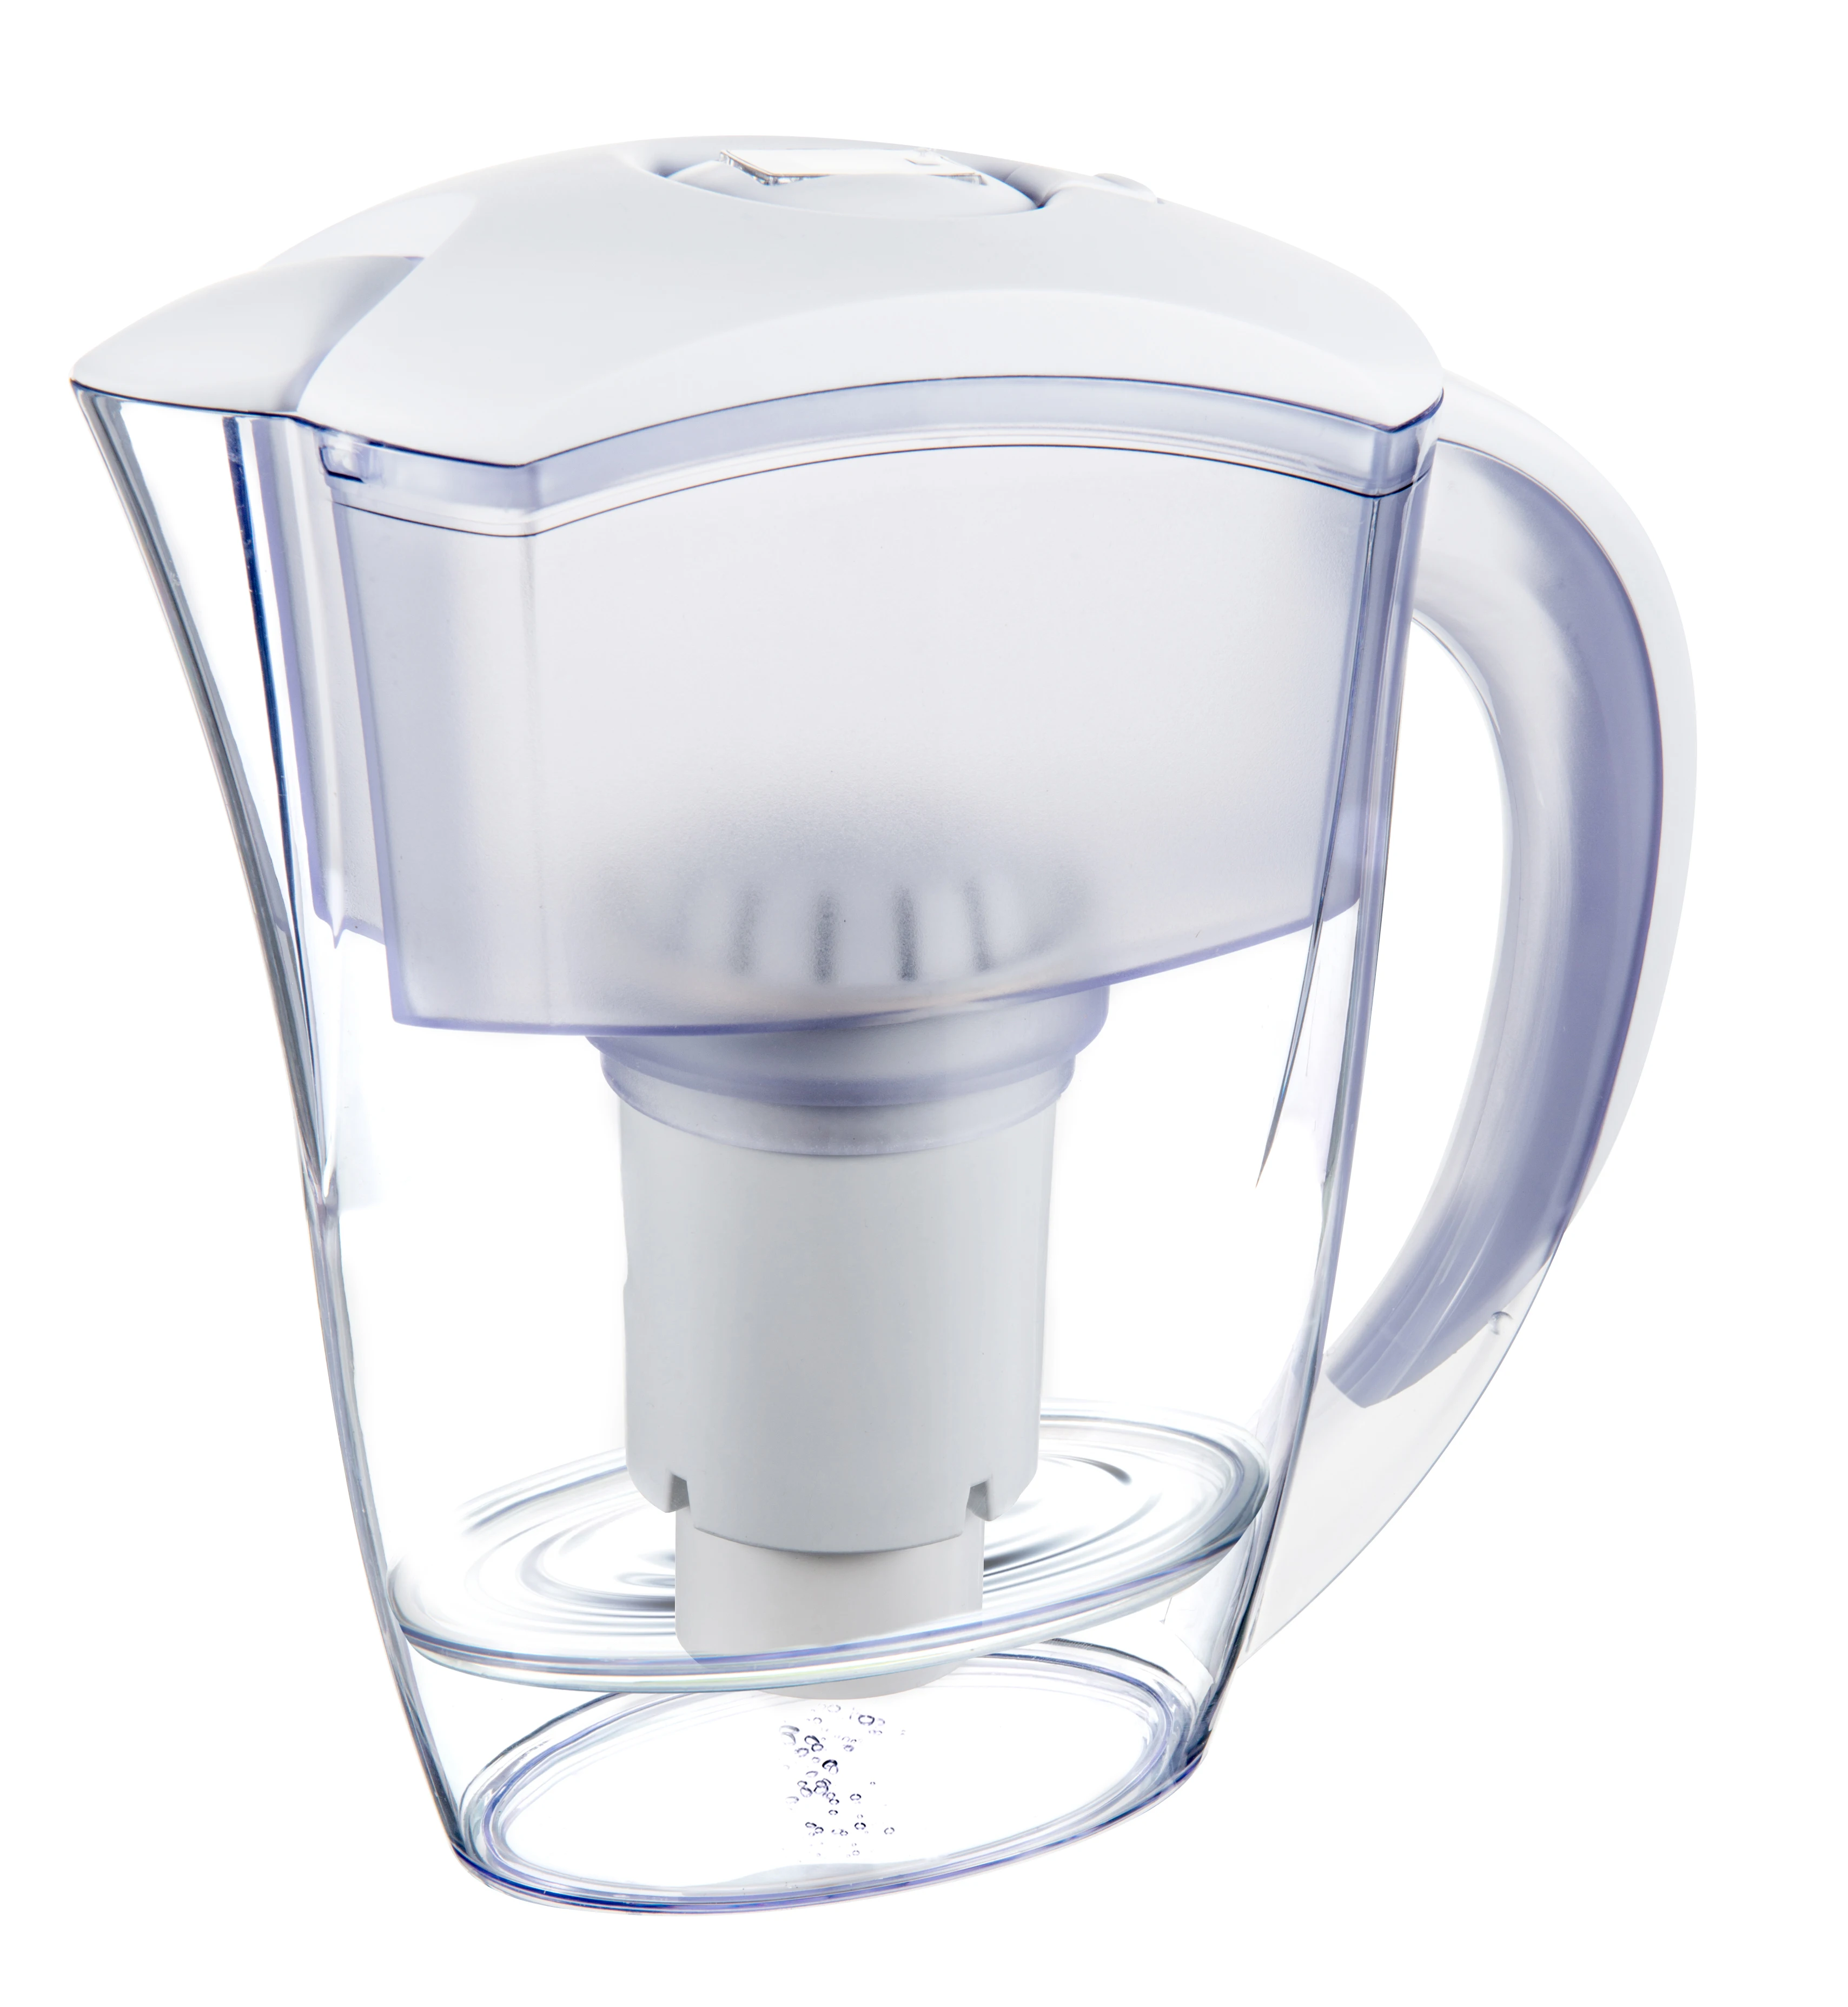 home used water jug with filter pitcher cartridge for drinking water purification (1600325324799)